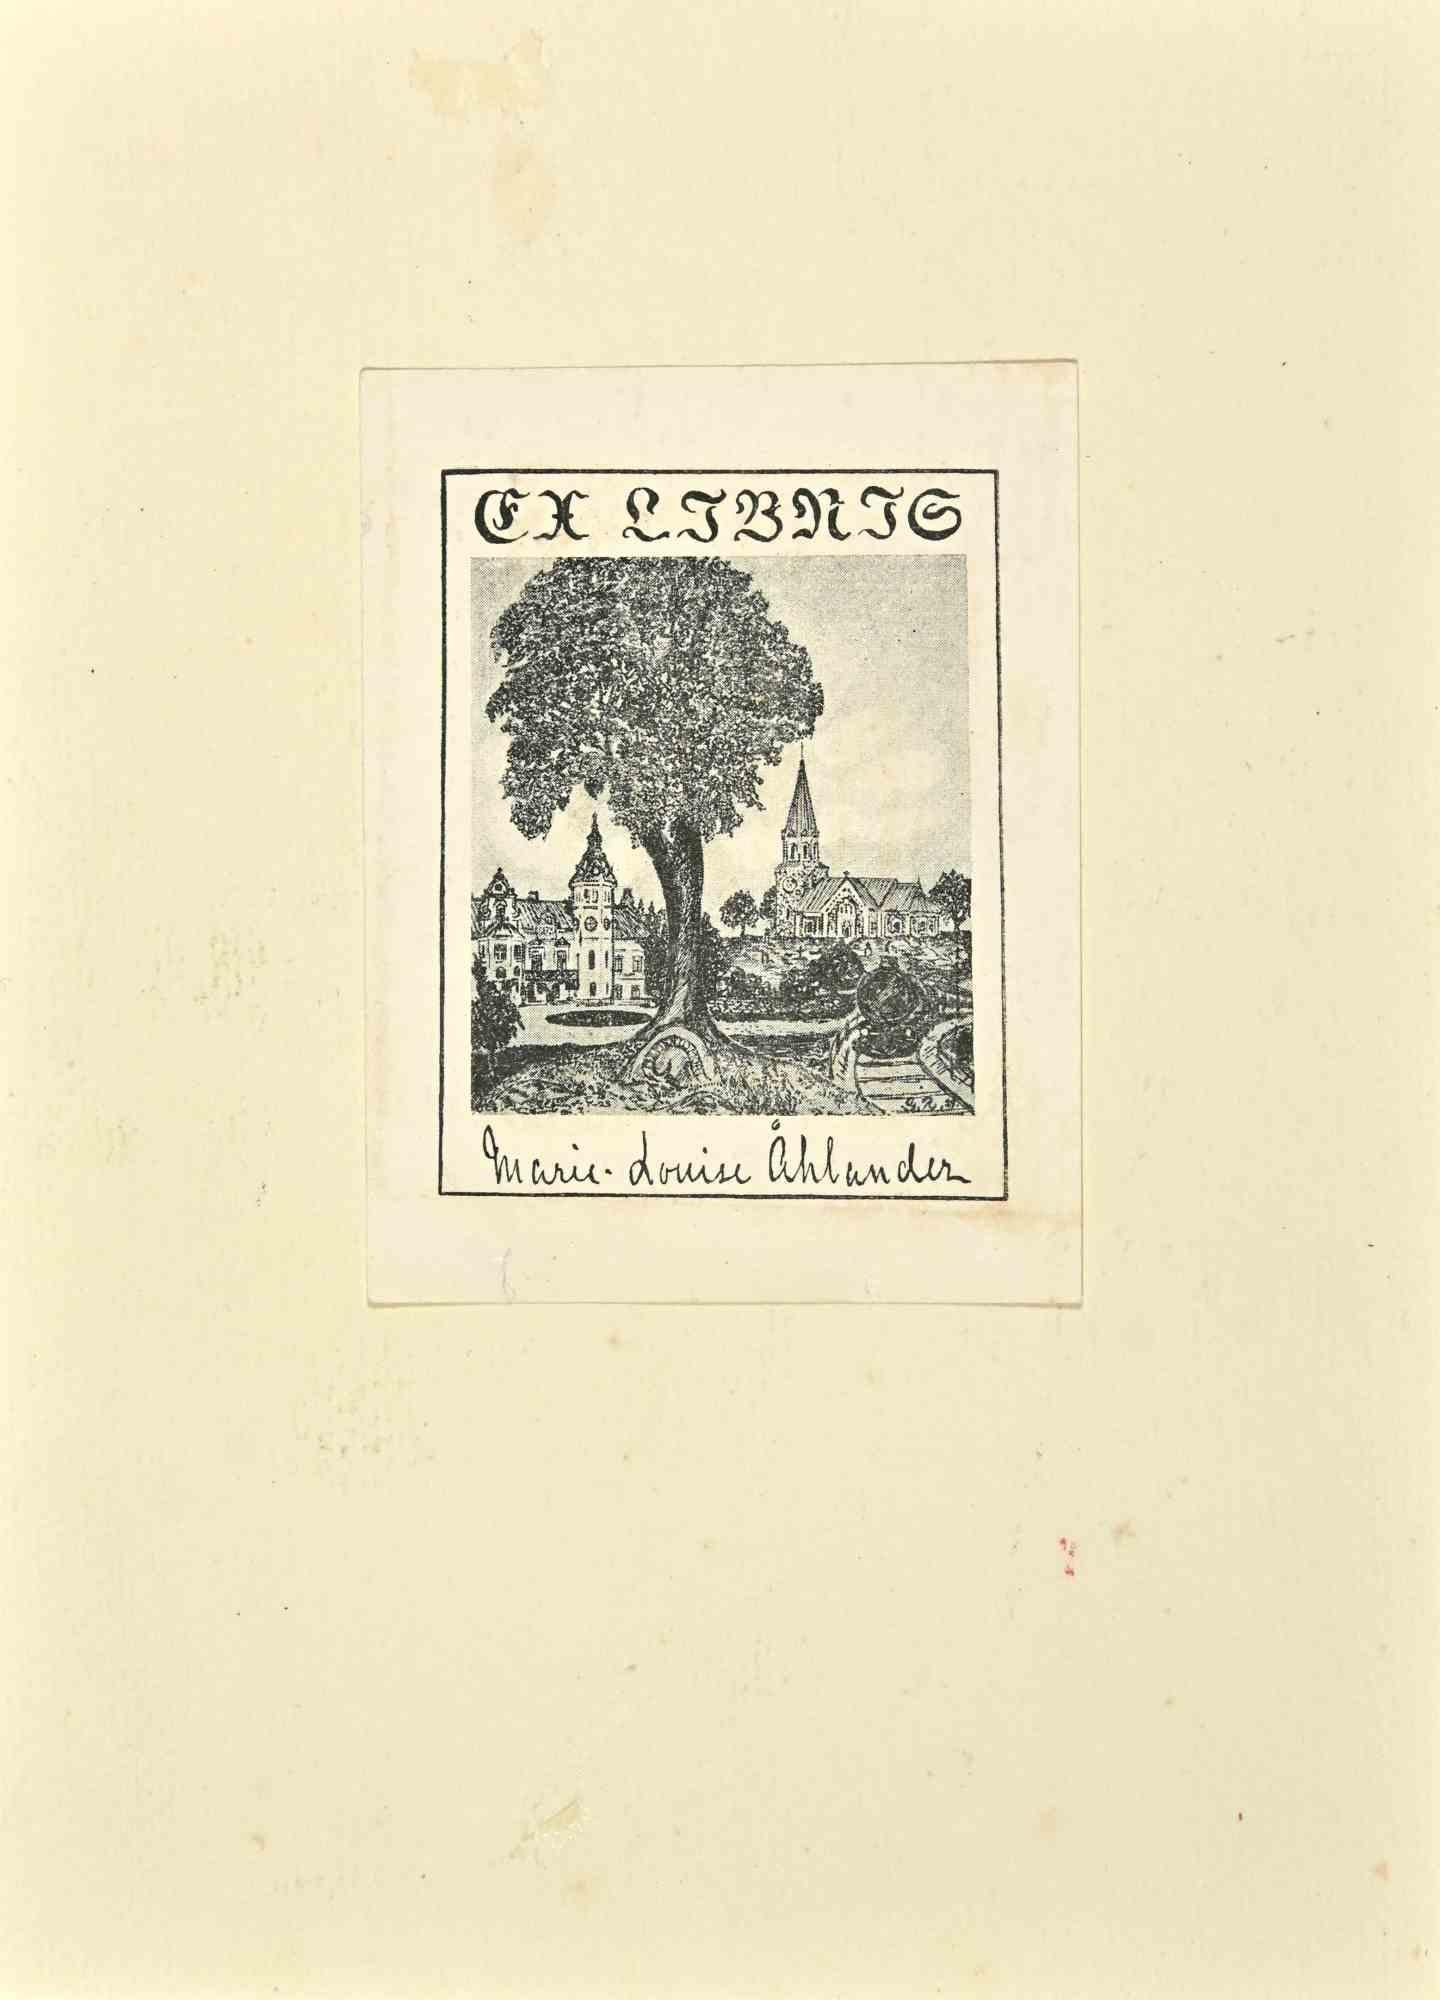 Ex Libris  - Marie Louise Ahlander is a Modern Artwork realized in Mid 20th Century, by Marie Louise Ahlander.
 
Ex Libris. B/W woodcut on paper.  
 
The work is glued on ivory cardboard.
 
Total dimensions: 20x 14.5 cm.

Good conditions.

The